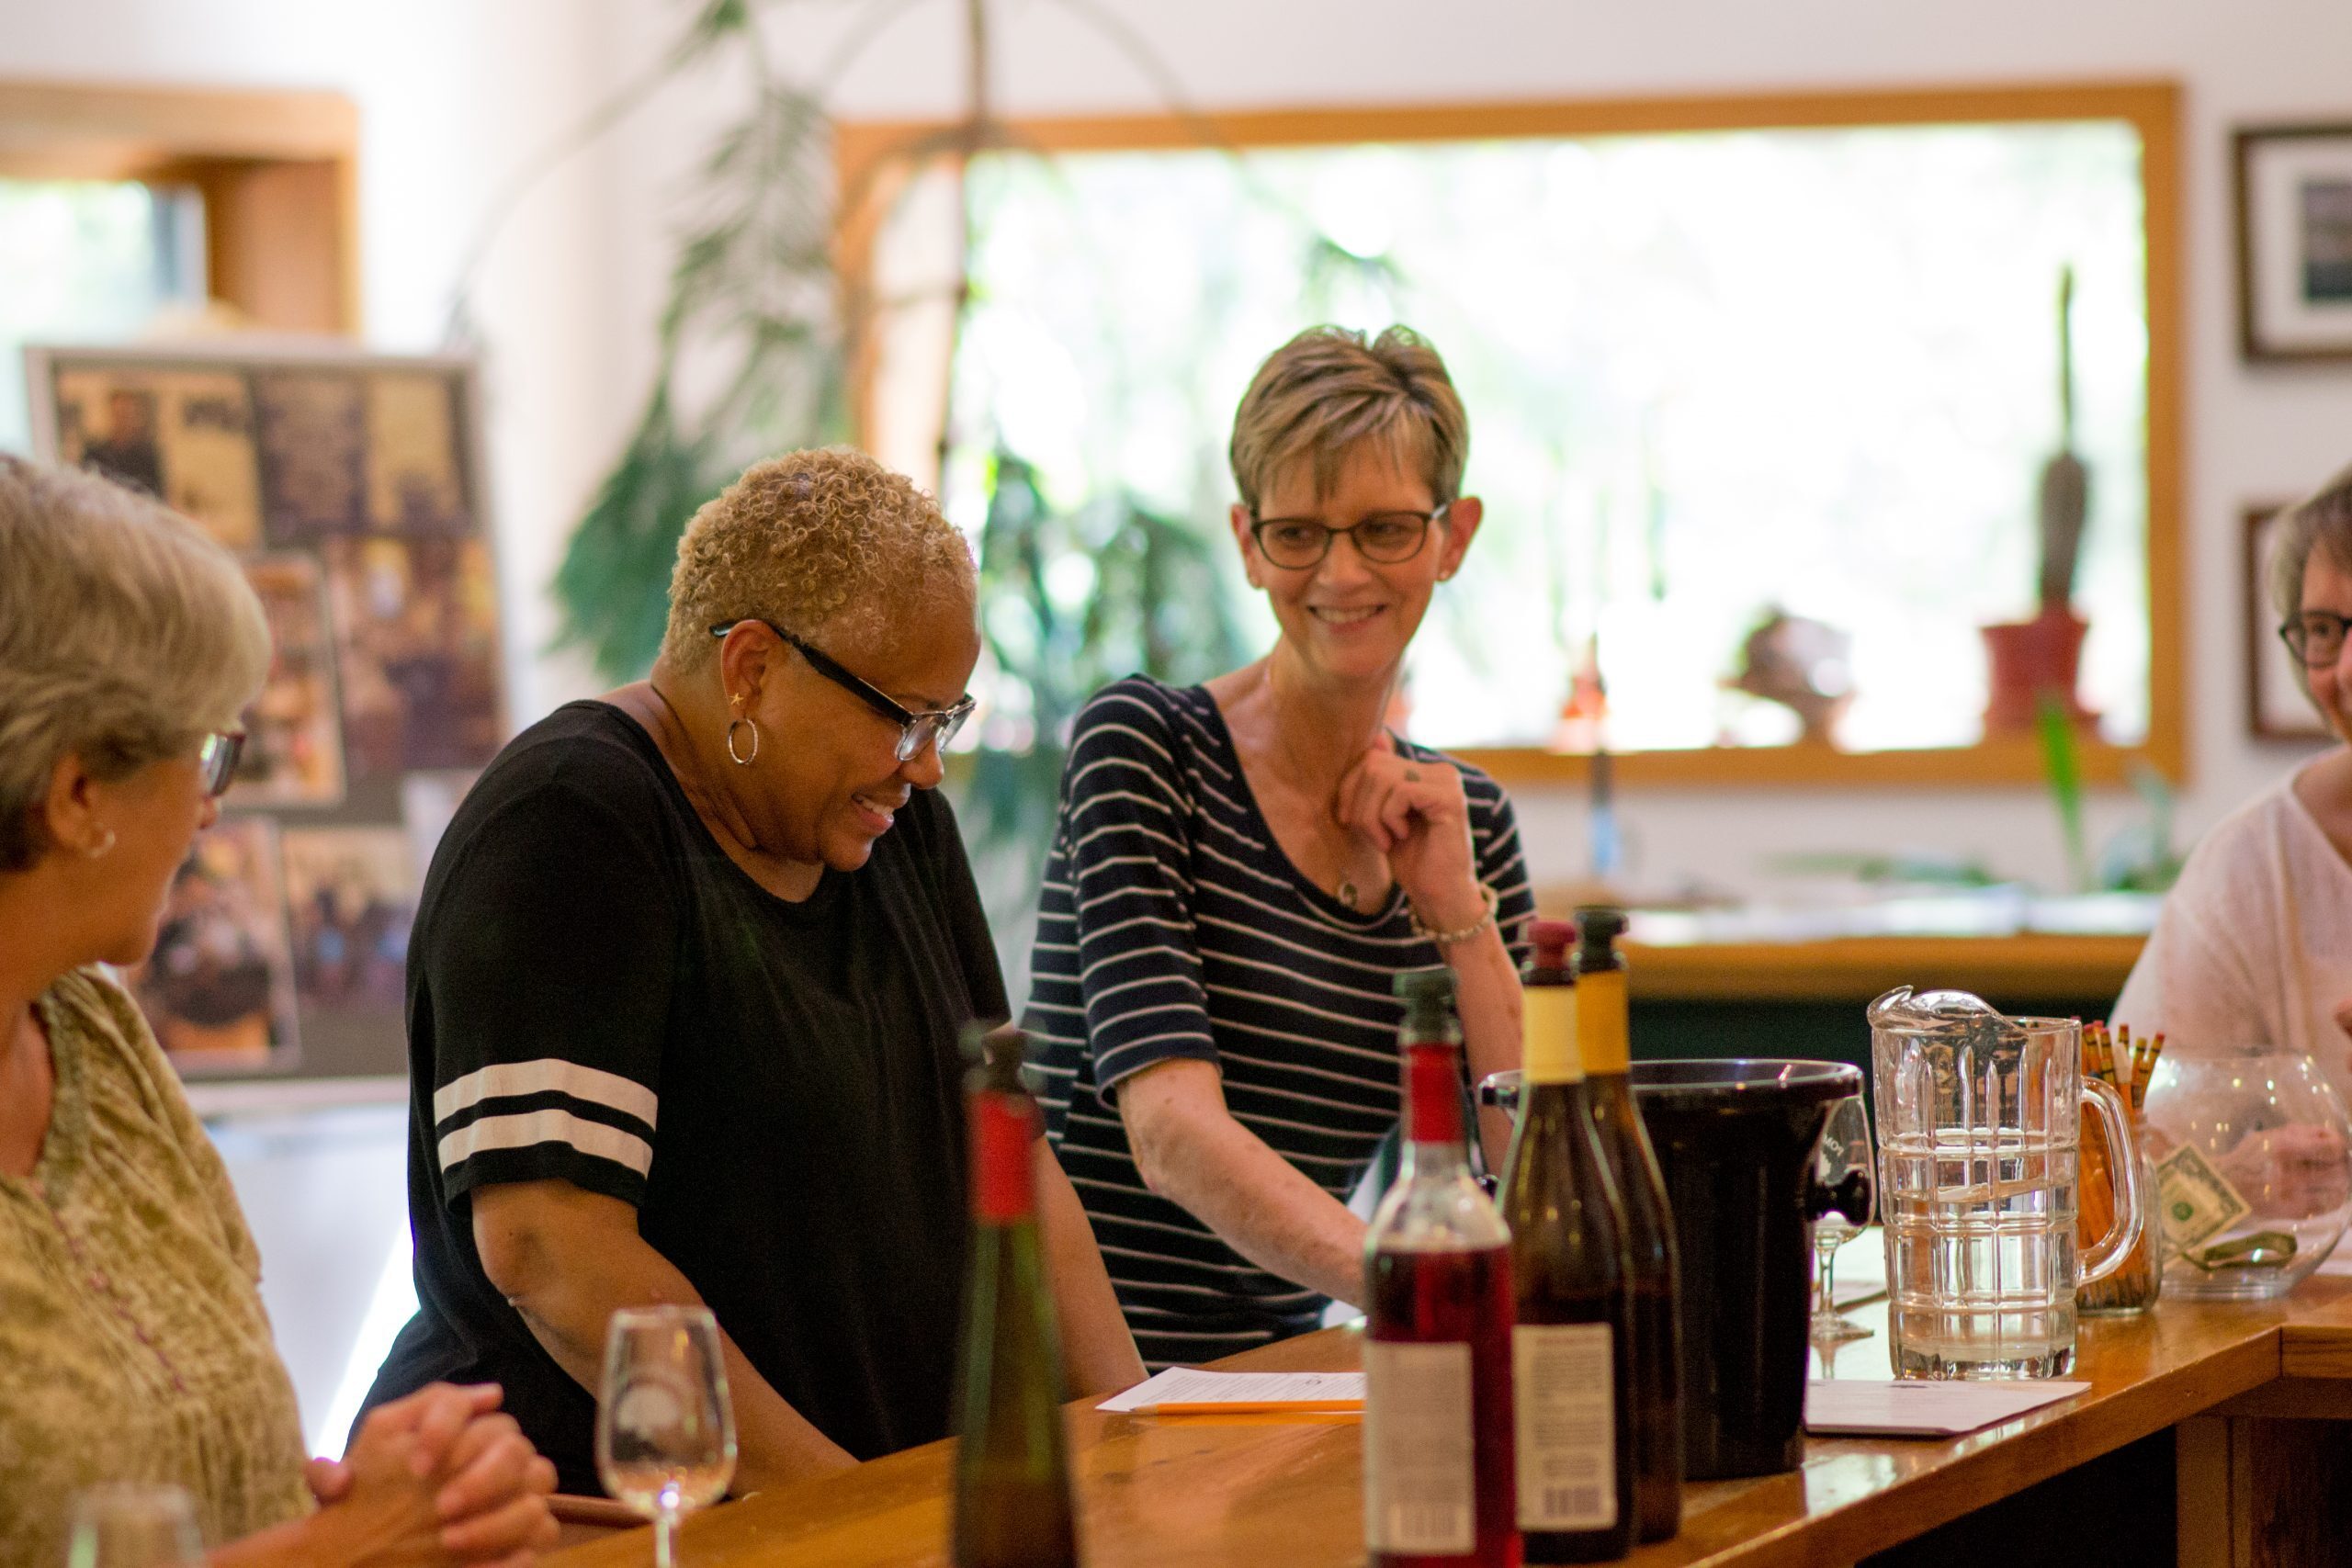 Taste testing on the Shawnee Wine Trail along the Lewis and Clark Historic Trail